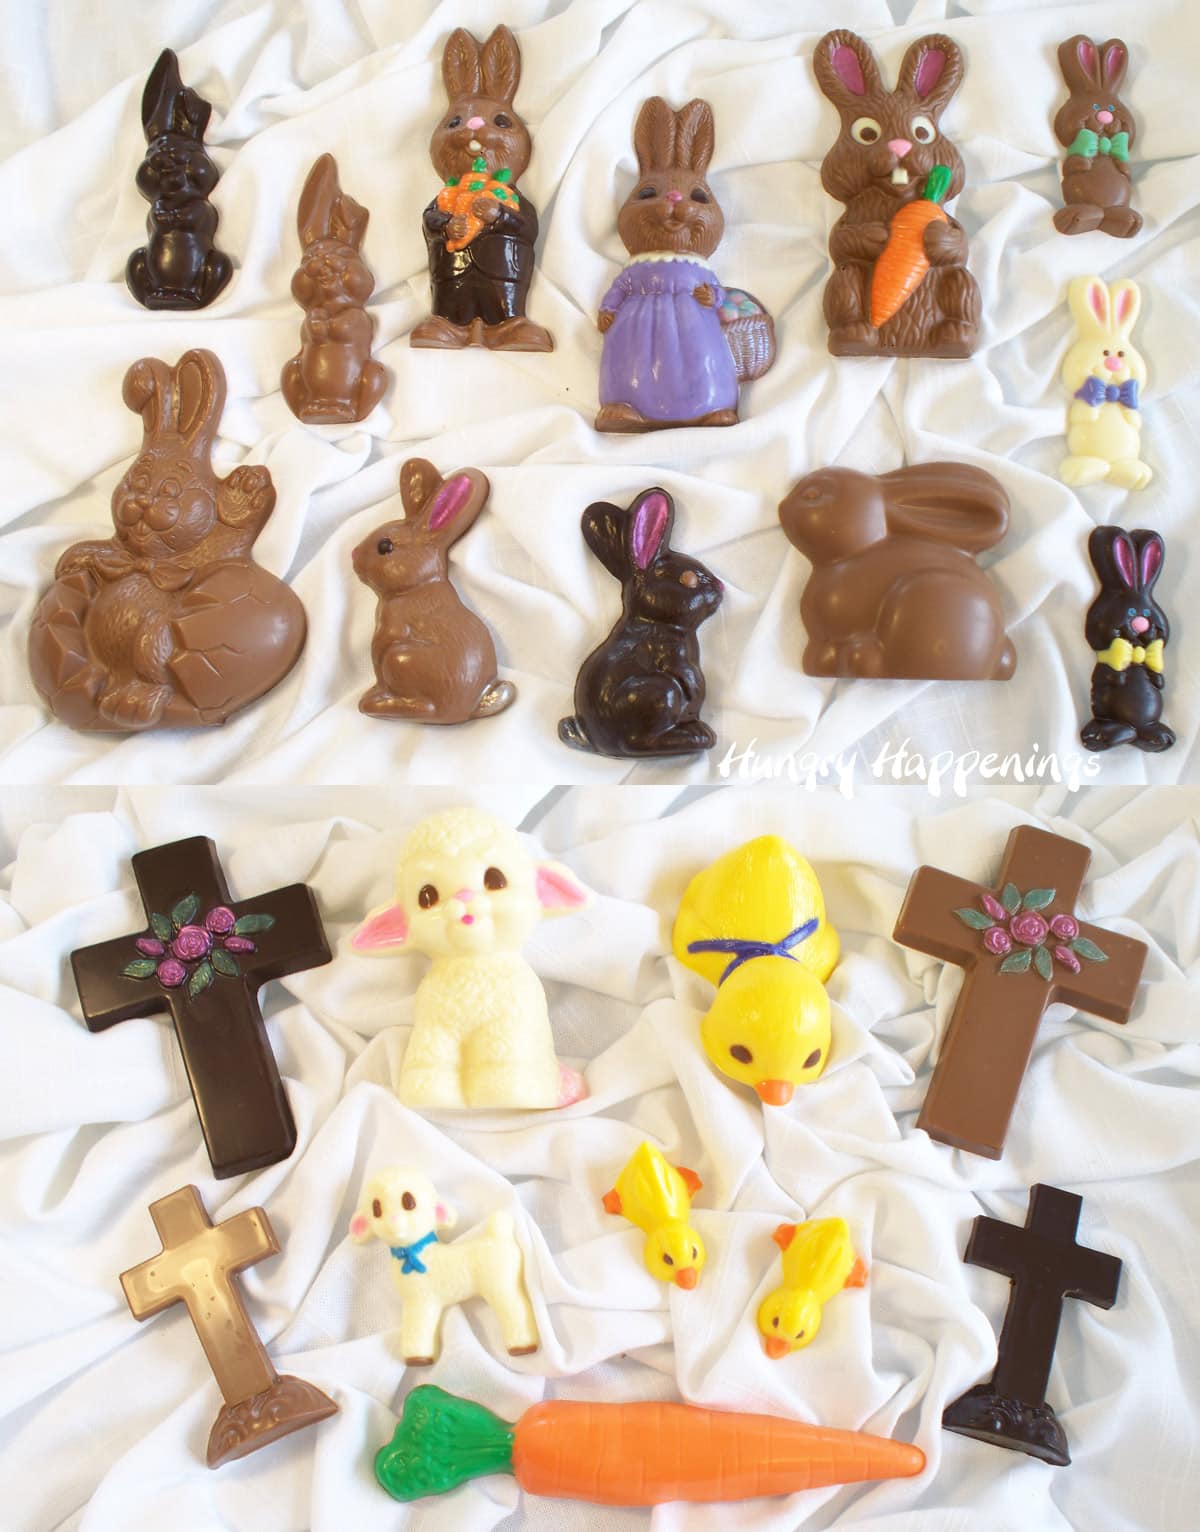 Solid chocolate bunnies, crosses, lambs, ducks, and carrots.